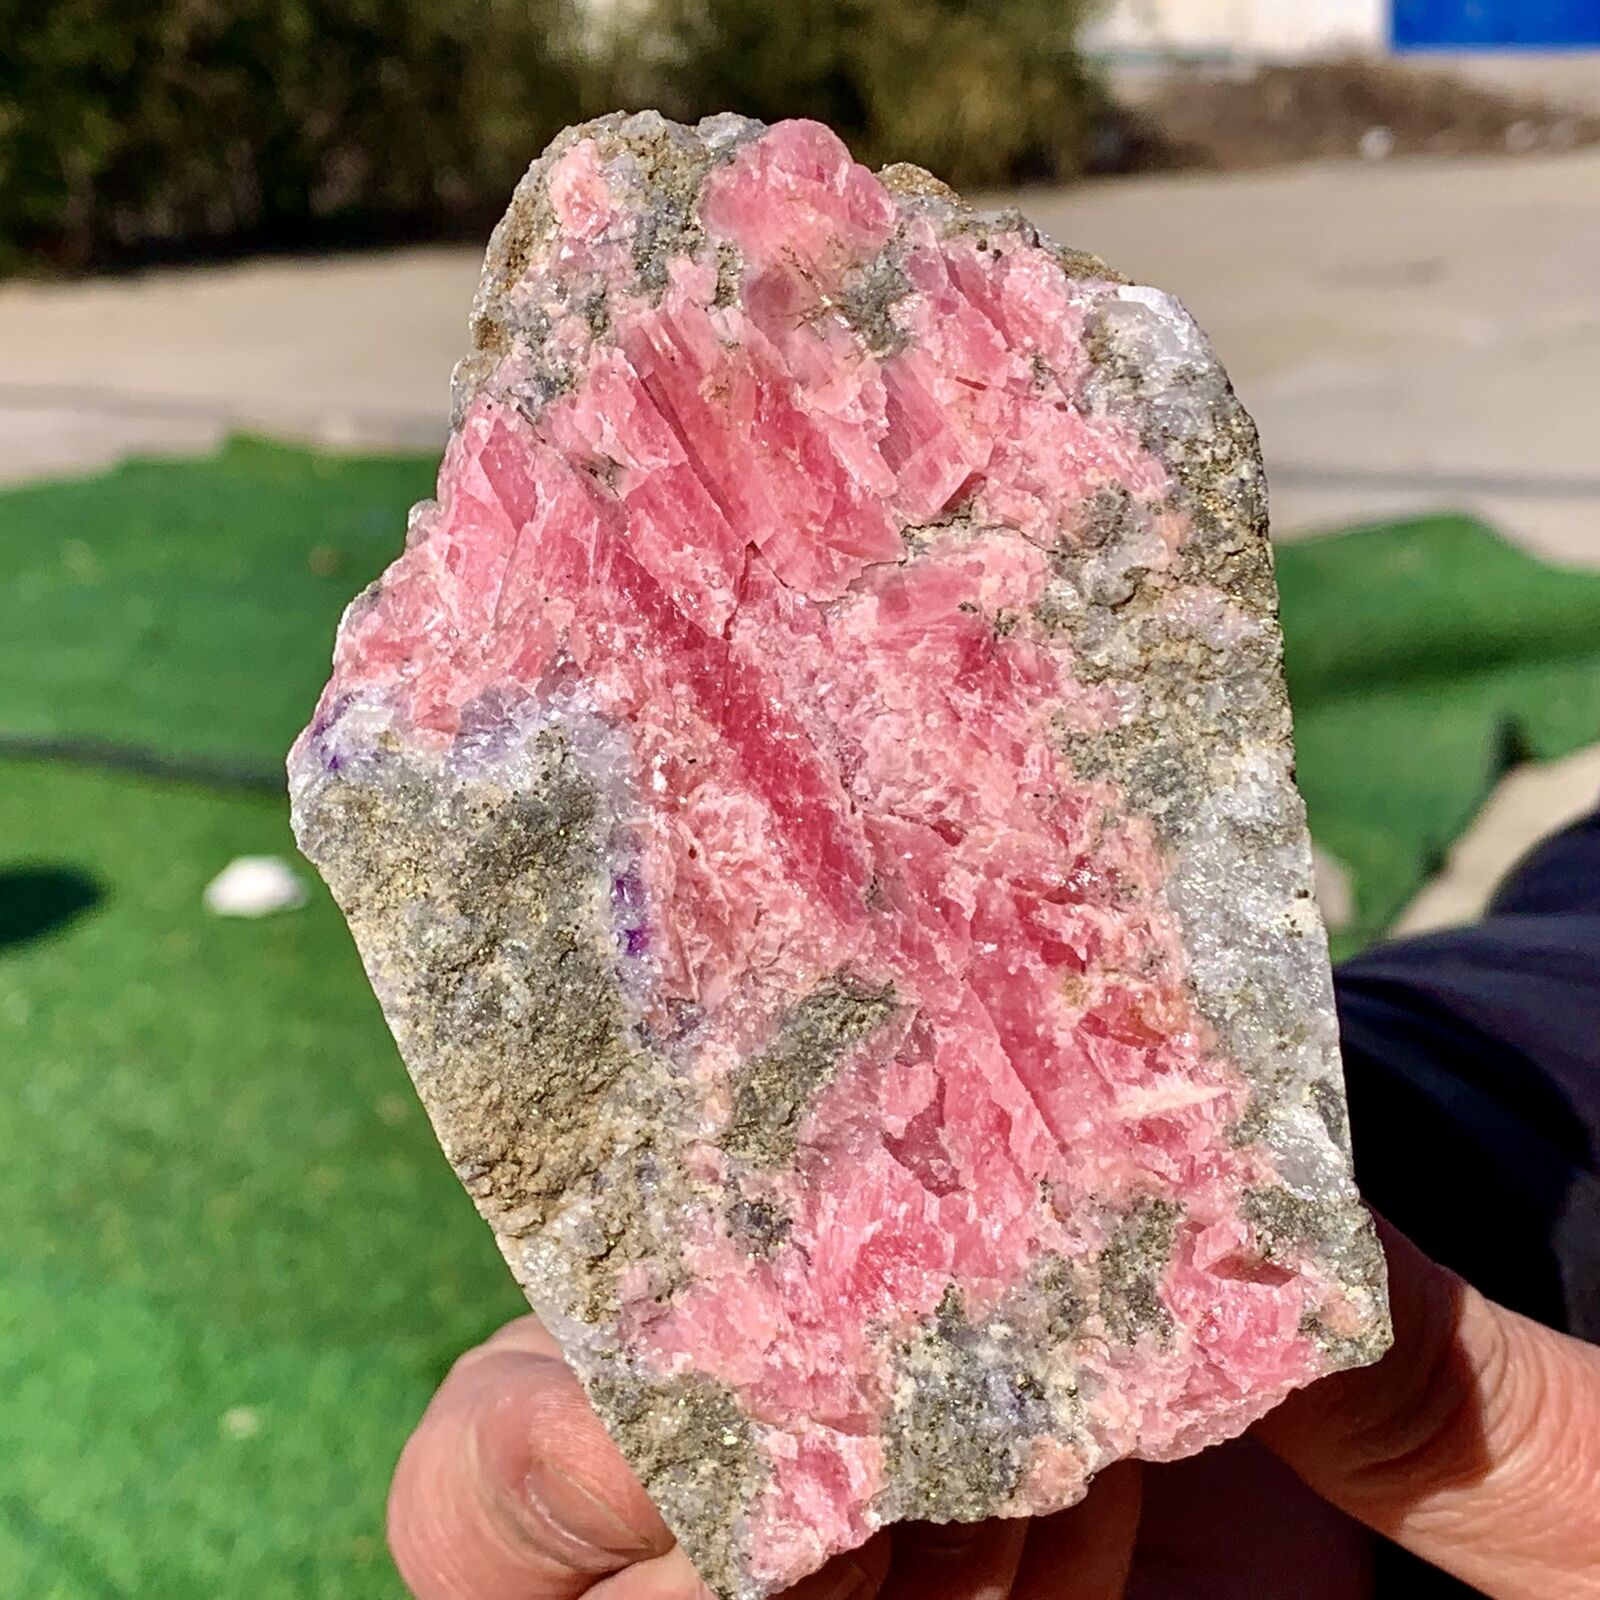 457G Mineral specimens of natural rhodochrosite coexisting with purple fluorite